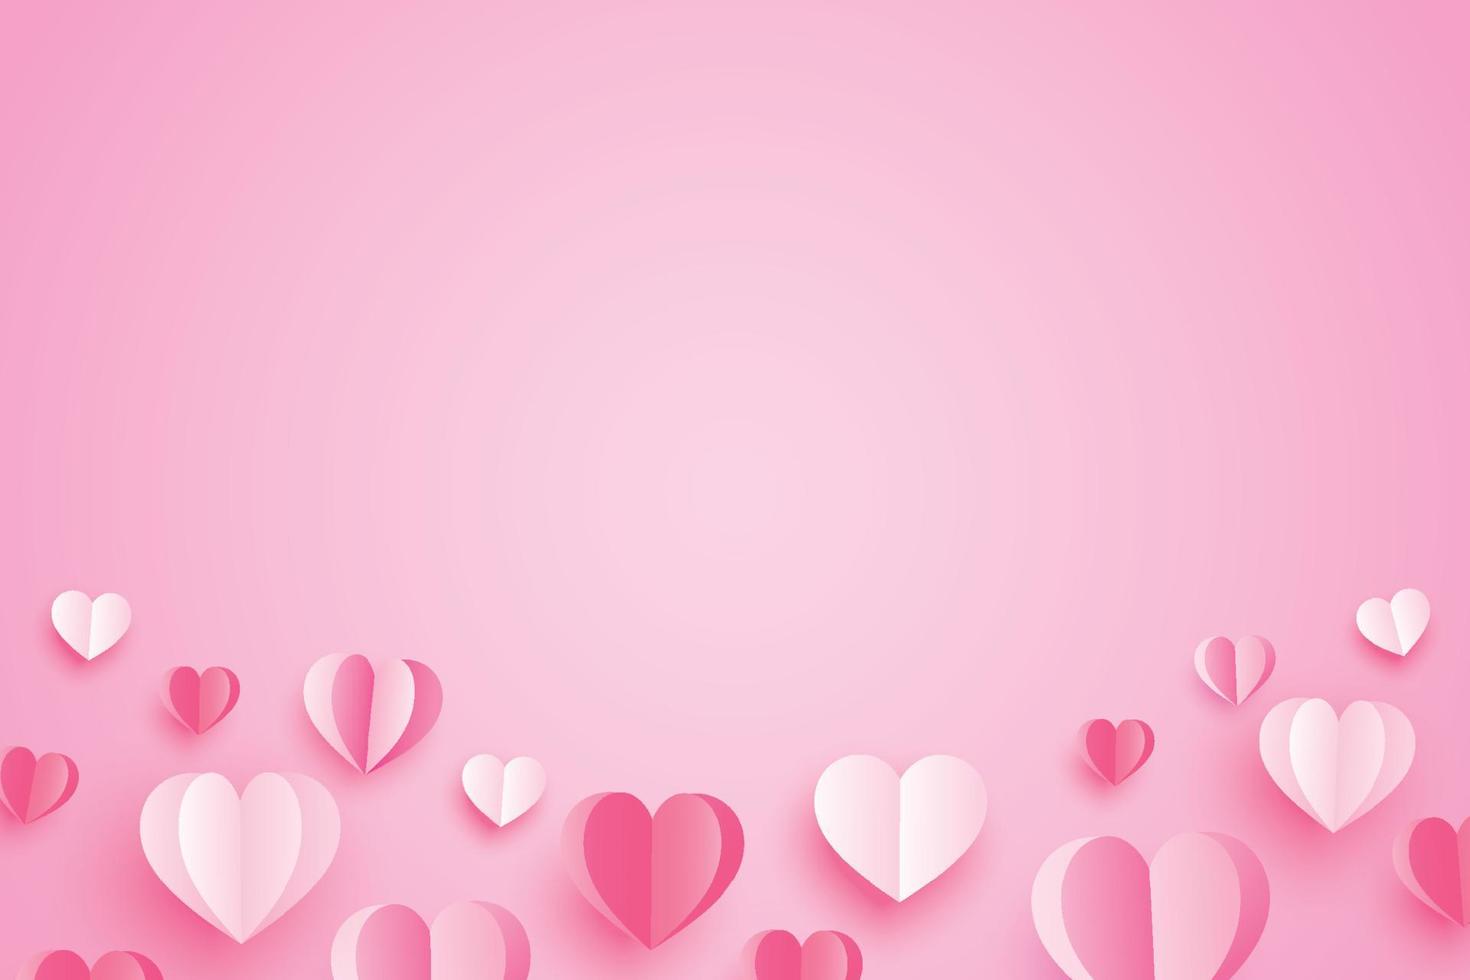 Happy valentines day with paper hearts and copy space on pink background. vector